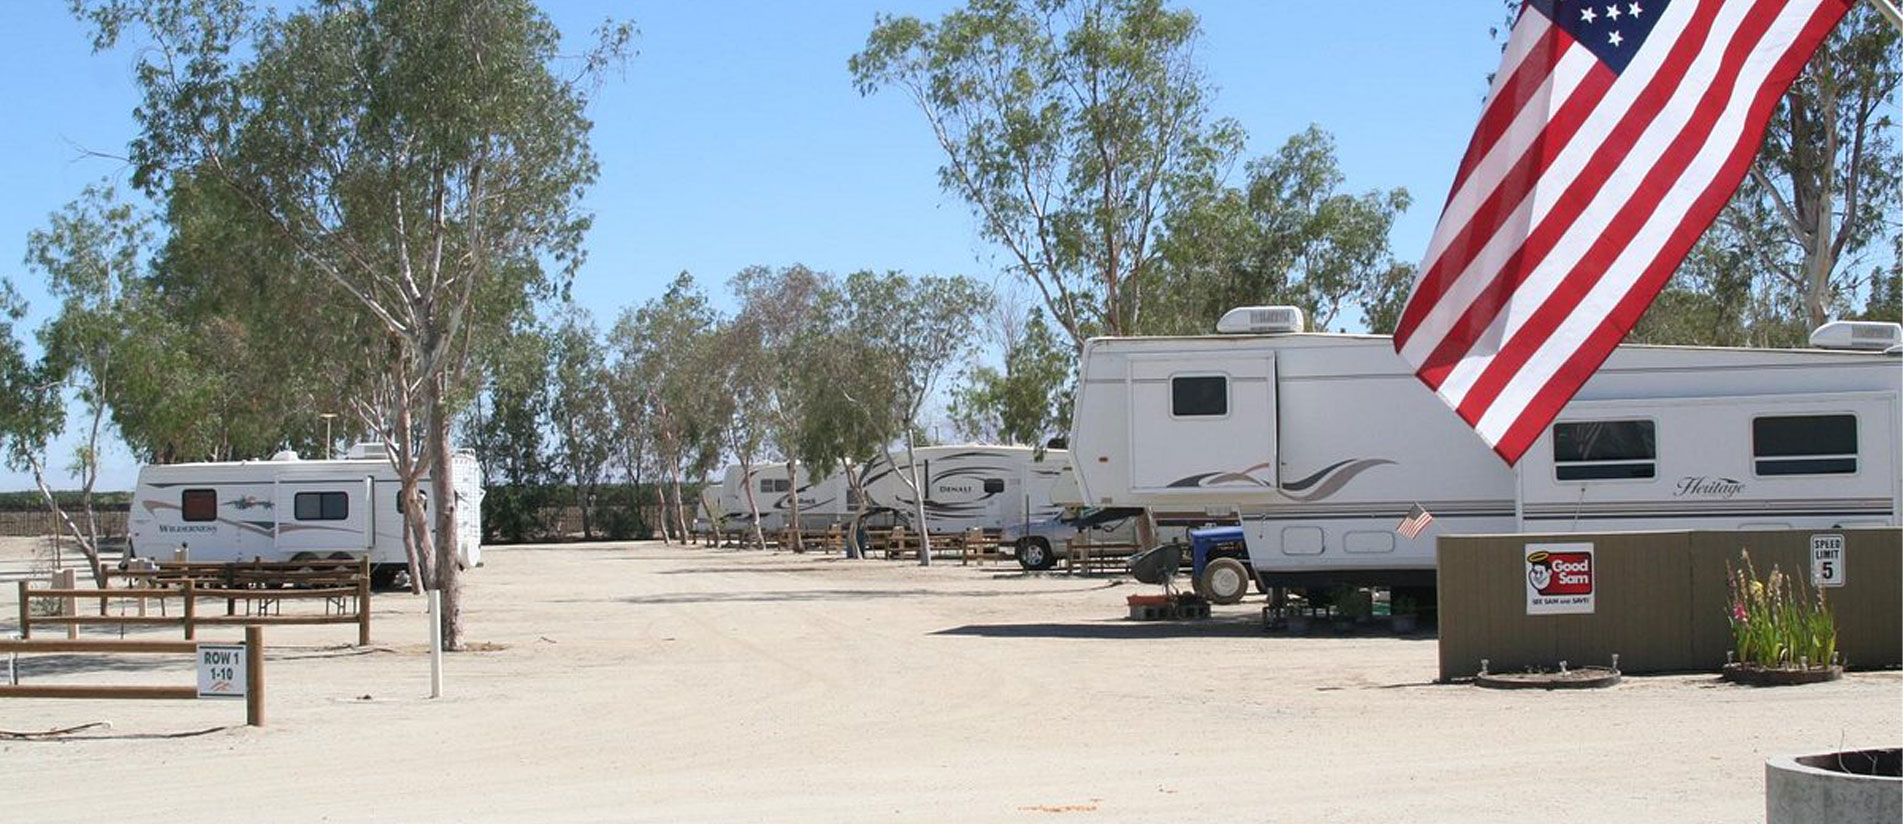 OUR SPACIOUS RV PARK HAS ALL THE AMENITIES YOU NEED, THERE ARE SEVERAL SHADED PULL THROUGH SITES WITH FULL HOOK-UPS AND 30/50-AMP SERVICE. 